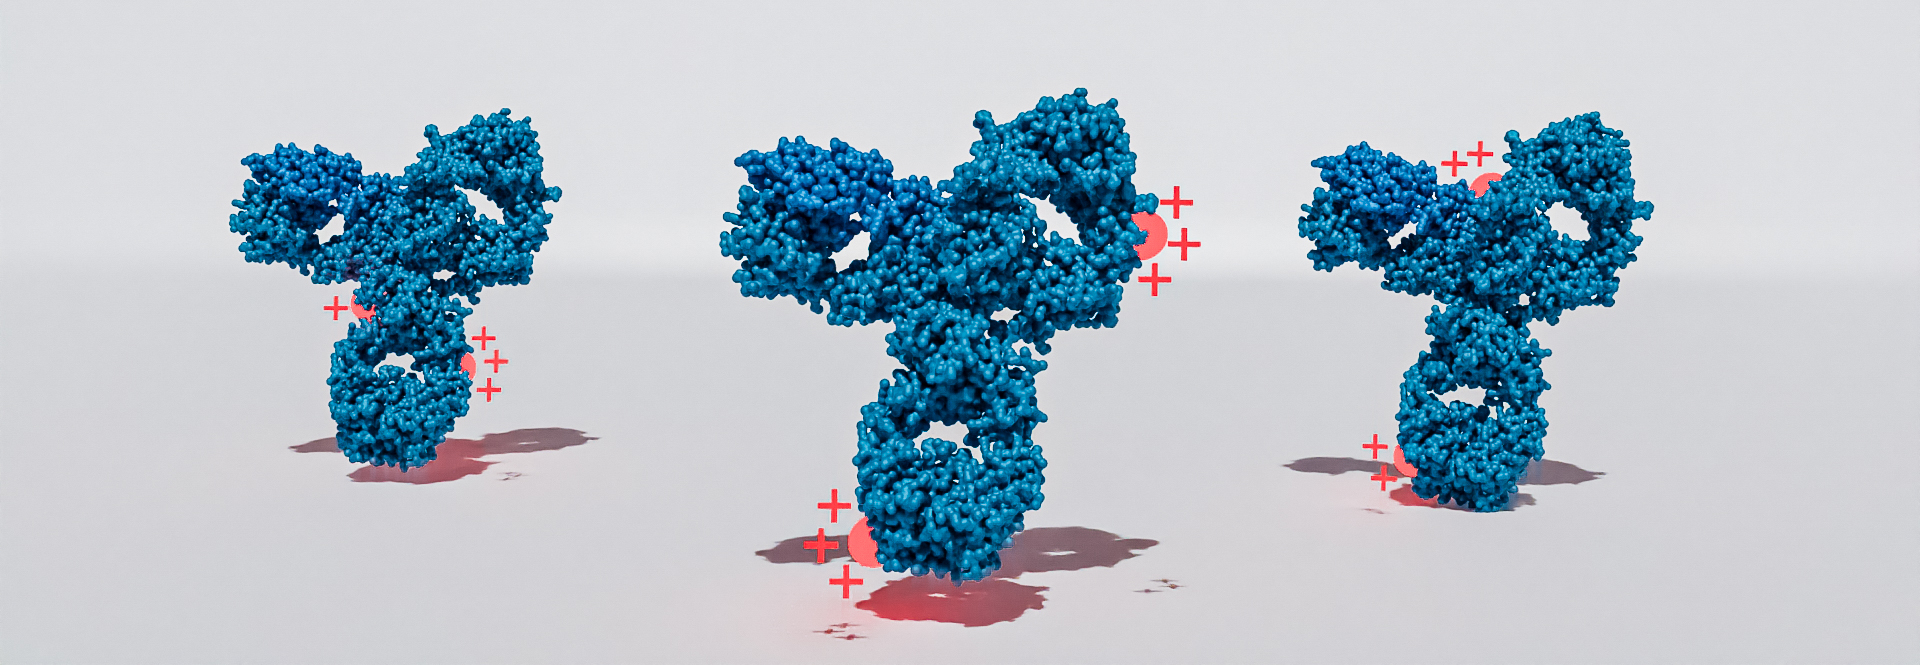 Charge Heterogeneity. 3D render antibodies carrying an electrical charge